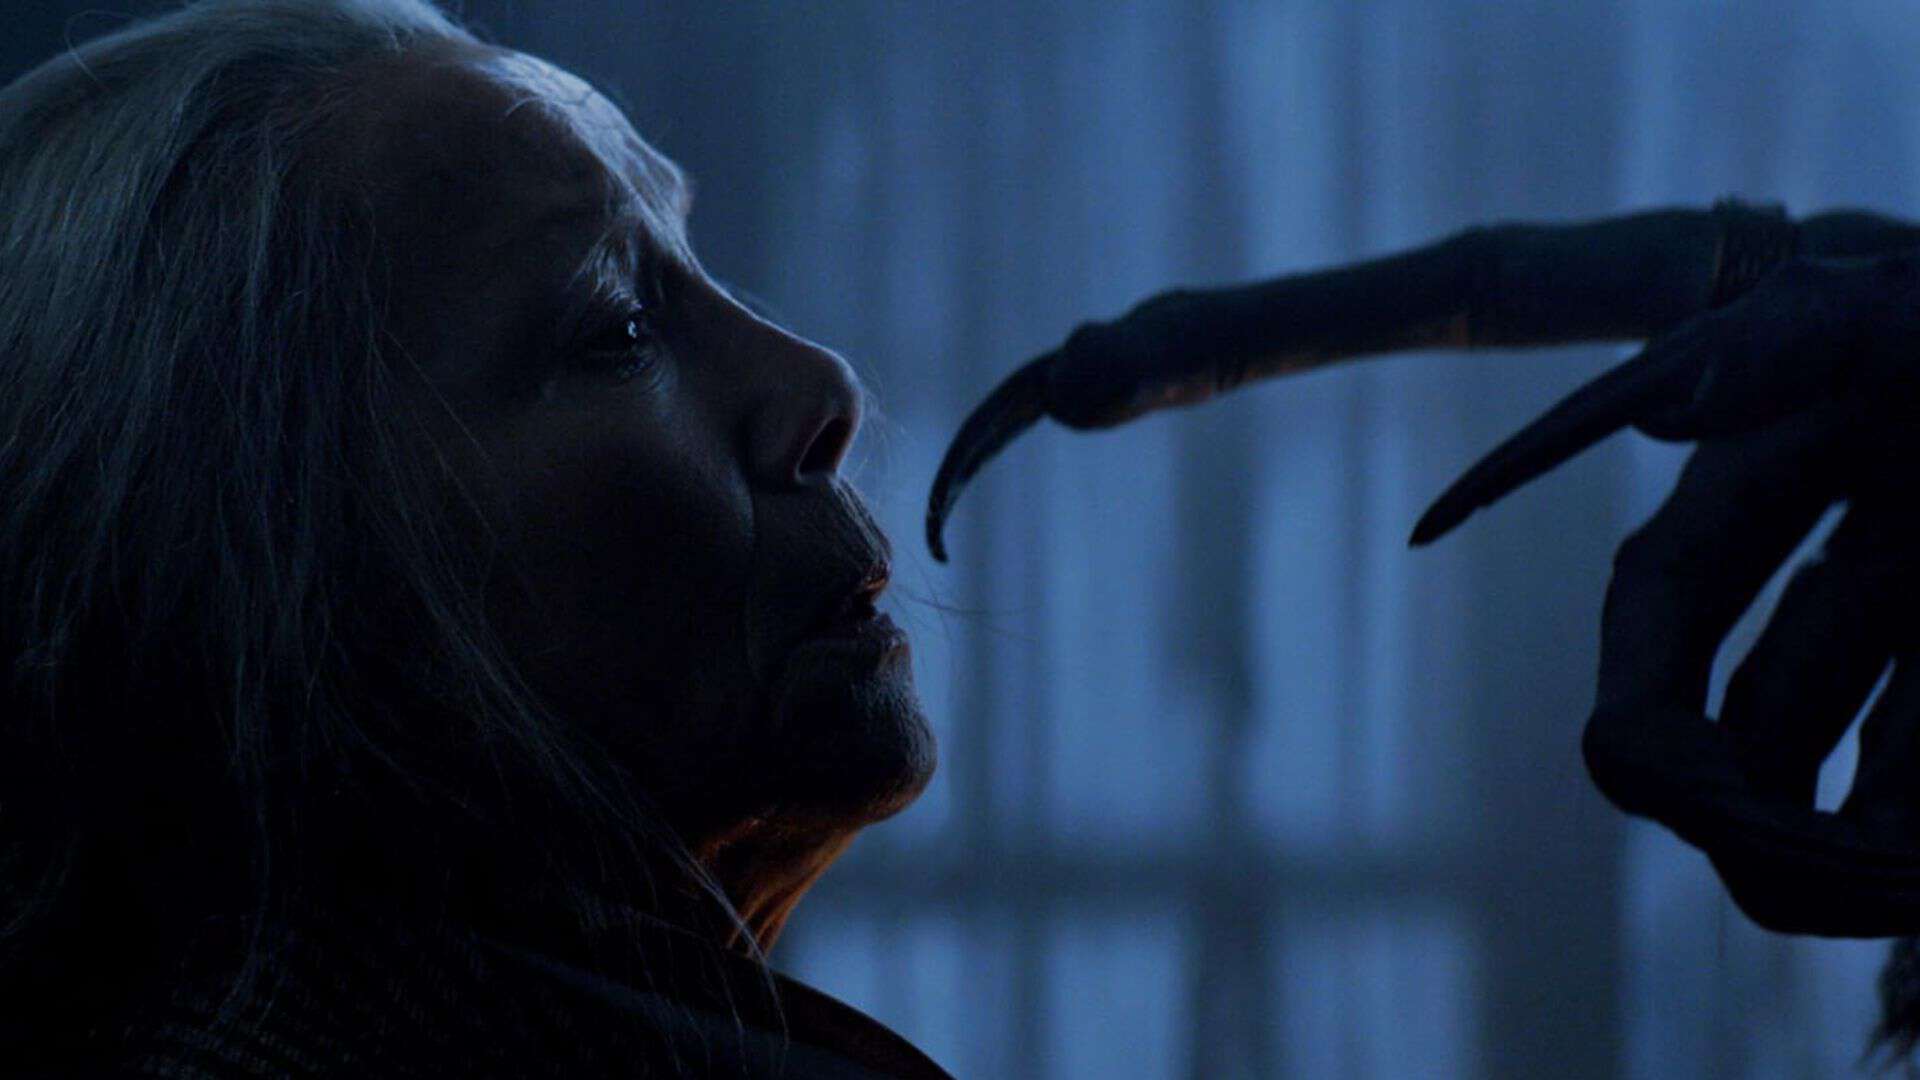 Krampus reaches for an old woman's face in this image from Legendary Pictures.